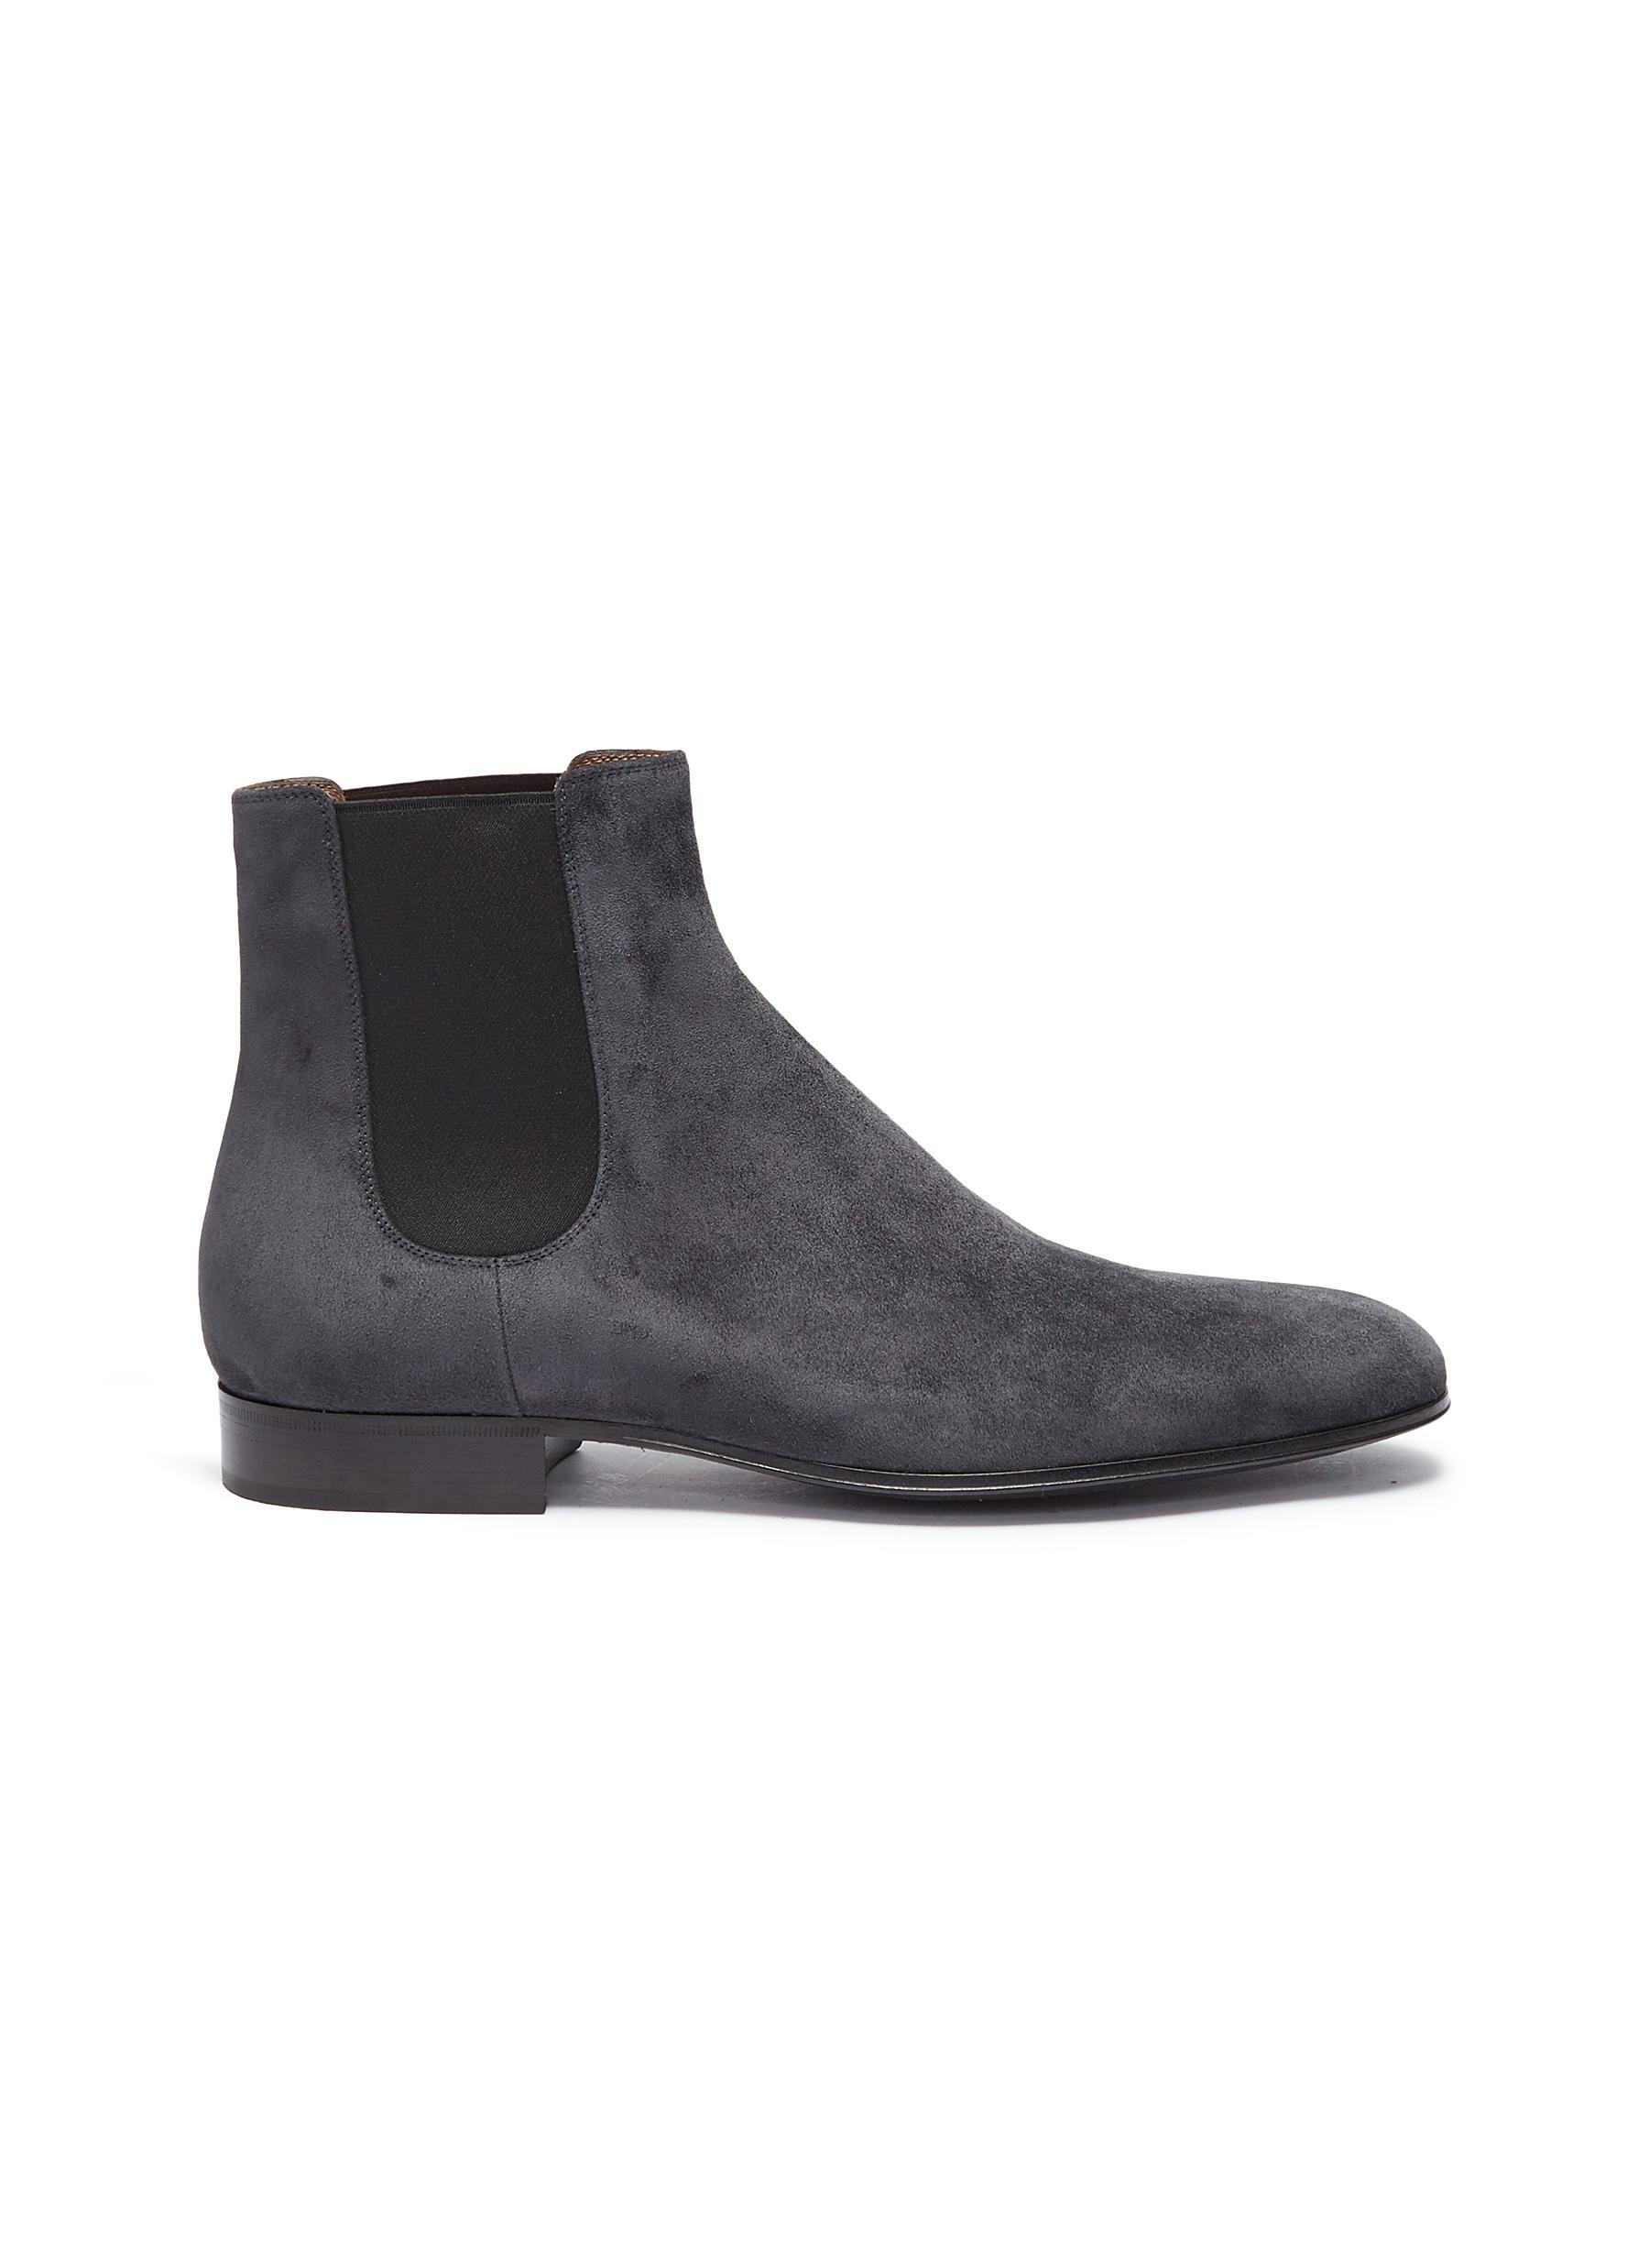 Gianvito Rossi 'alain' Suede Chelsea Boots for Men - Lyst